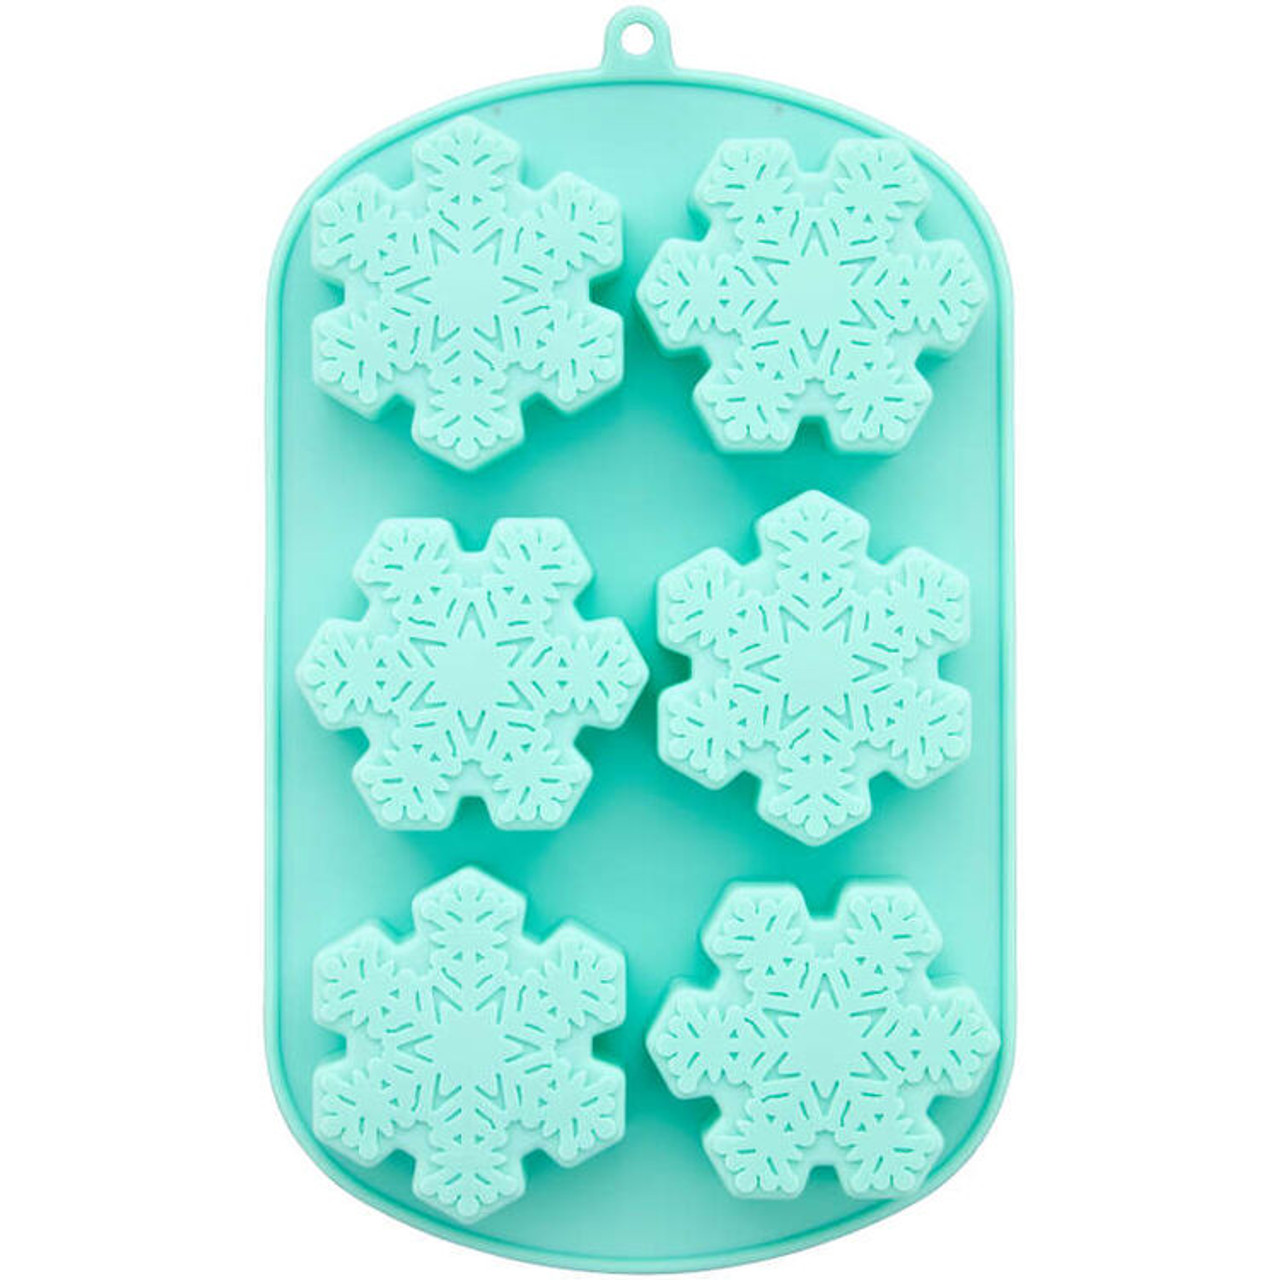 https://cdn11.bigcommerce.com/s-w8h1g5/images/stencil/1280x1280/products/12566/33703/2105-0-0743-Wilton-Winter-Snowflake-Silicone-Baking-and-Candy-Mold-6-Cavity-A2__62518.1637038098.jpg?c=2